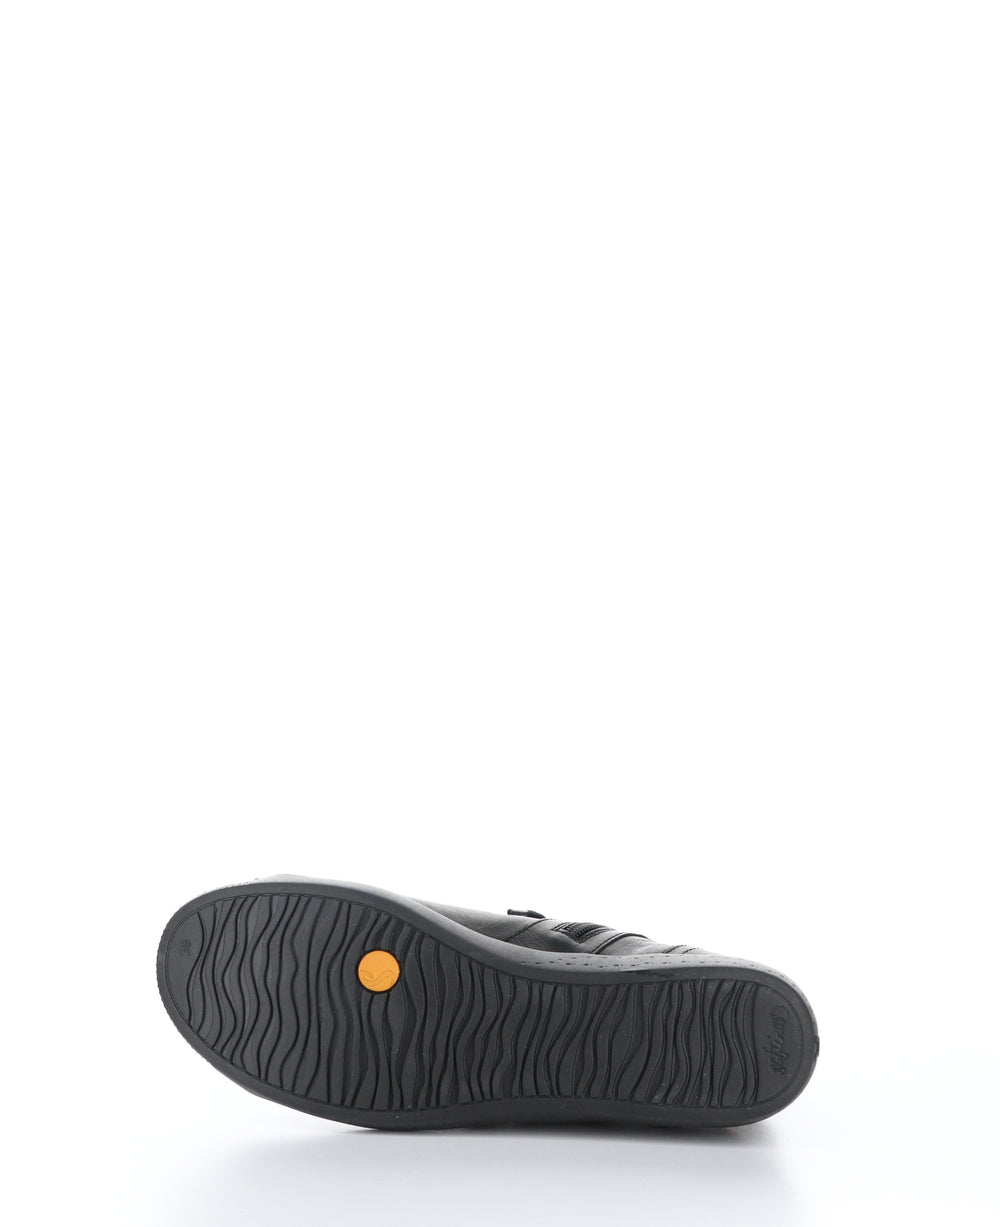 IBBI653SOF Black Round Toe Shoes|IBBI653SOF Chaussures à Bout Rond in Noir